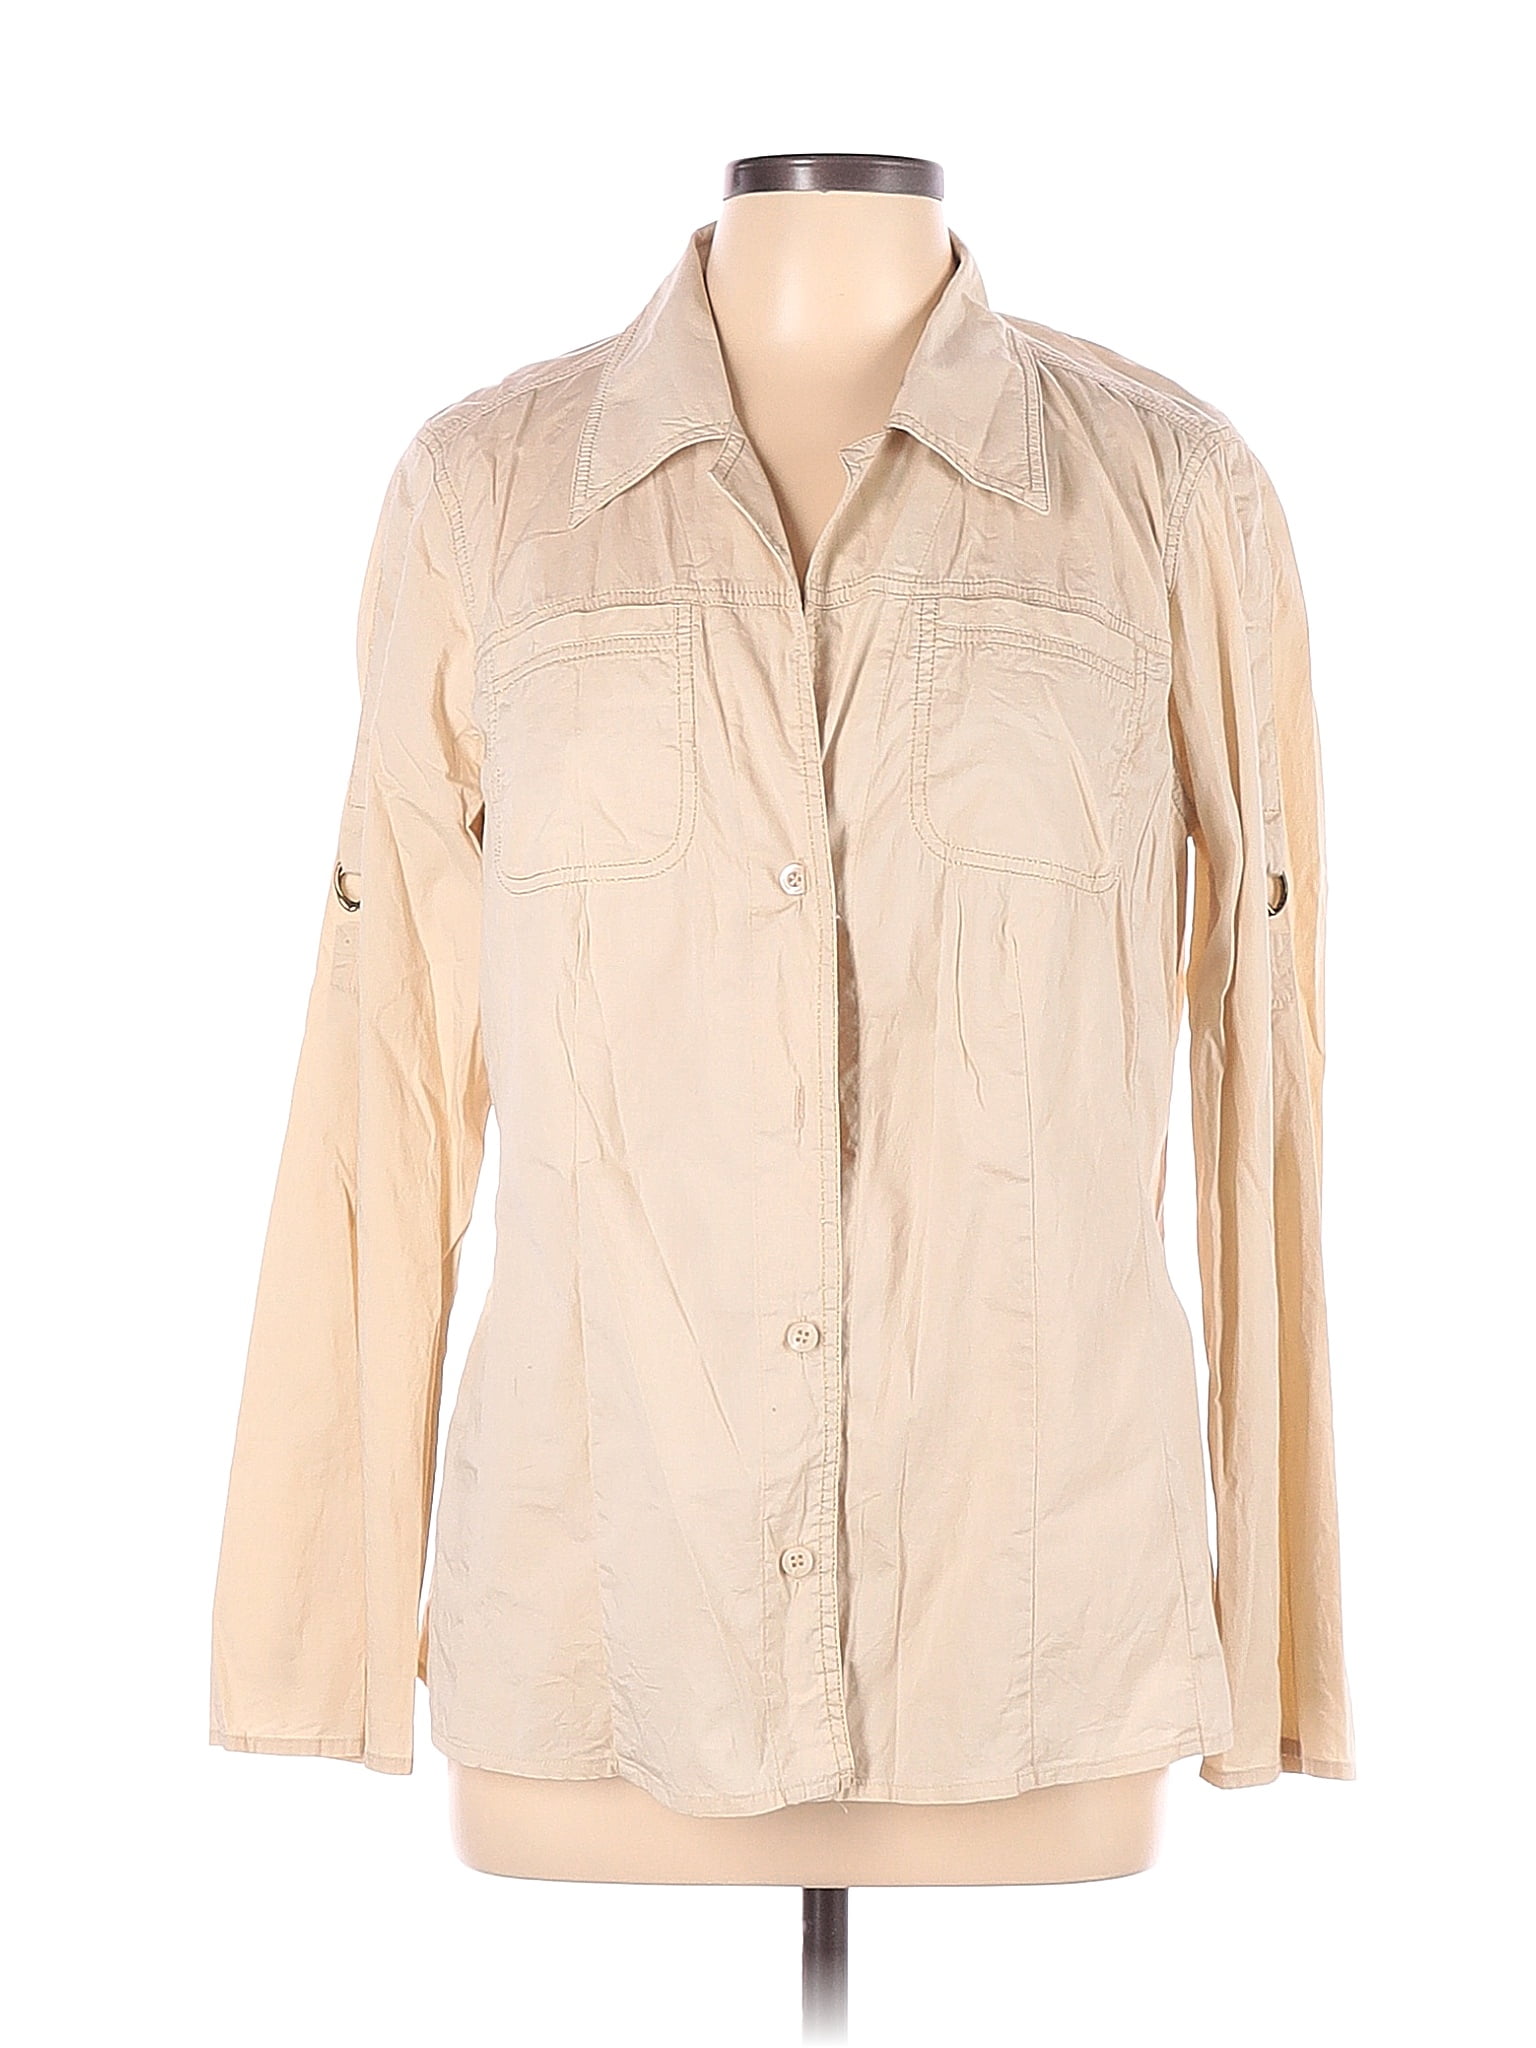 Marina Sport Solid Tan Ivory Long Sleeve Button-Down Shirt Size 12 (21 ...